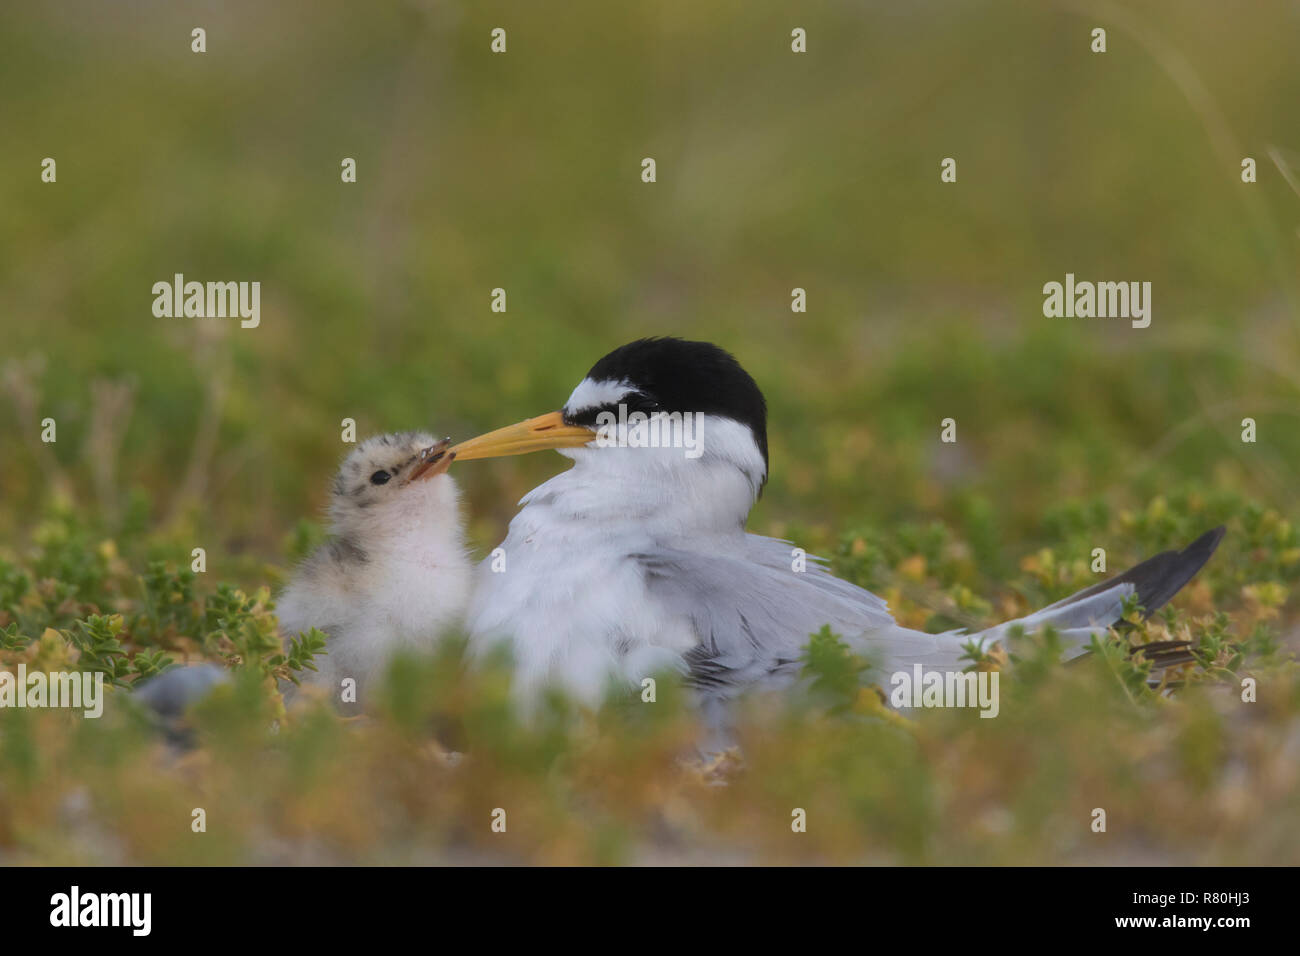 Little Tern (Sterna albifrons). Parent with chick. Germany Stock Photo